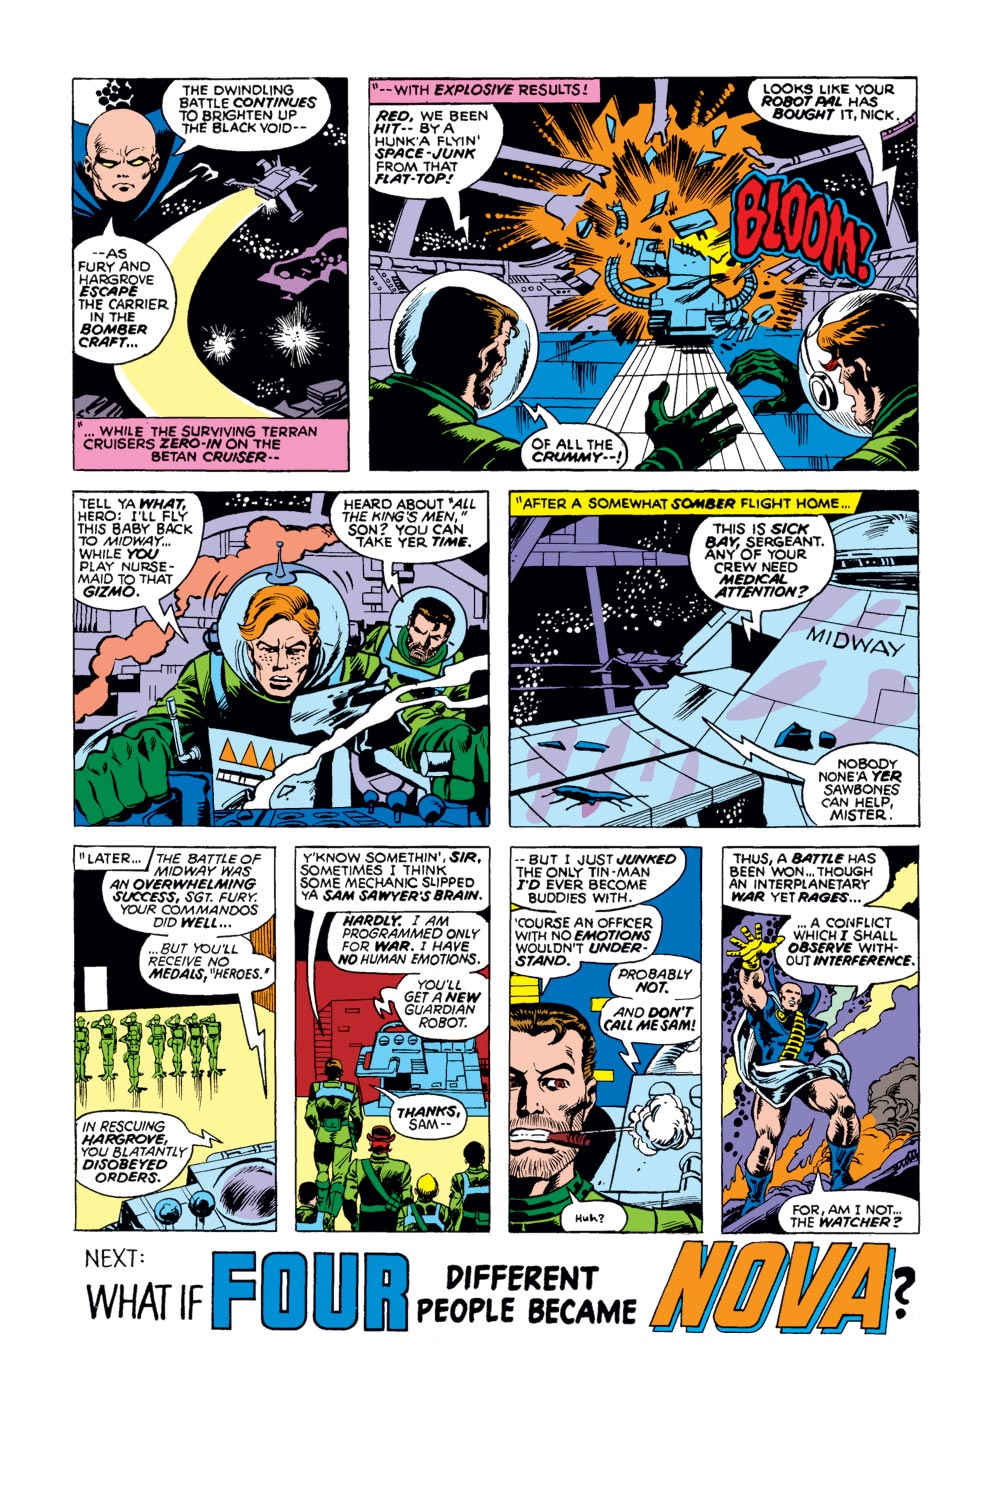 What If? (1977) issue 14 - Sgt. Fury had Fought WWII in Outer Space - Page 34